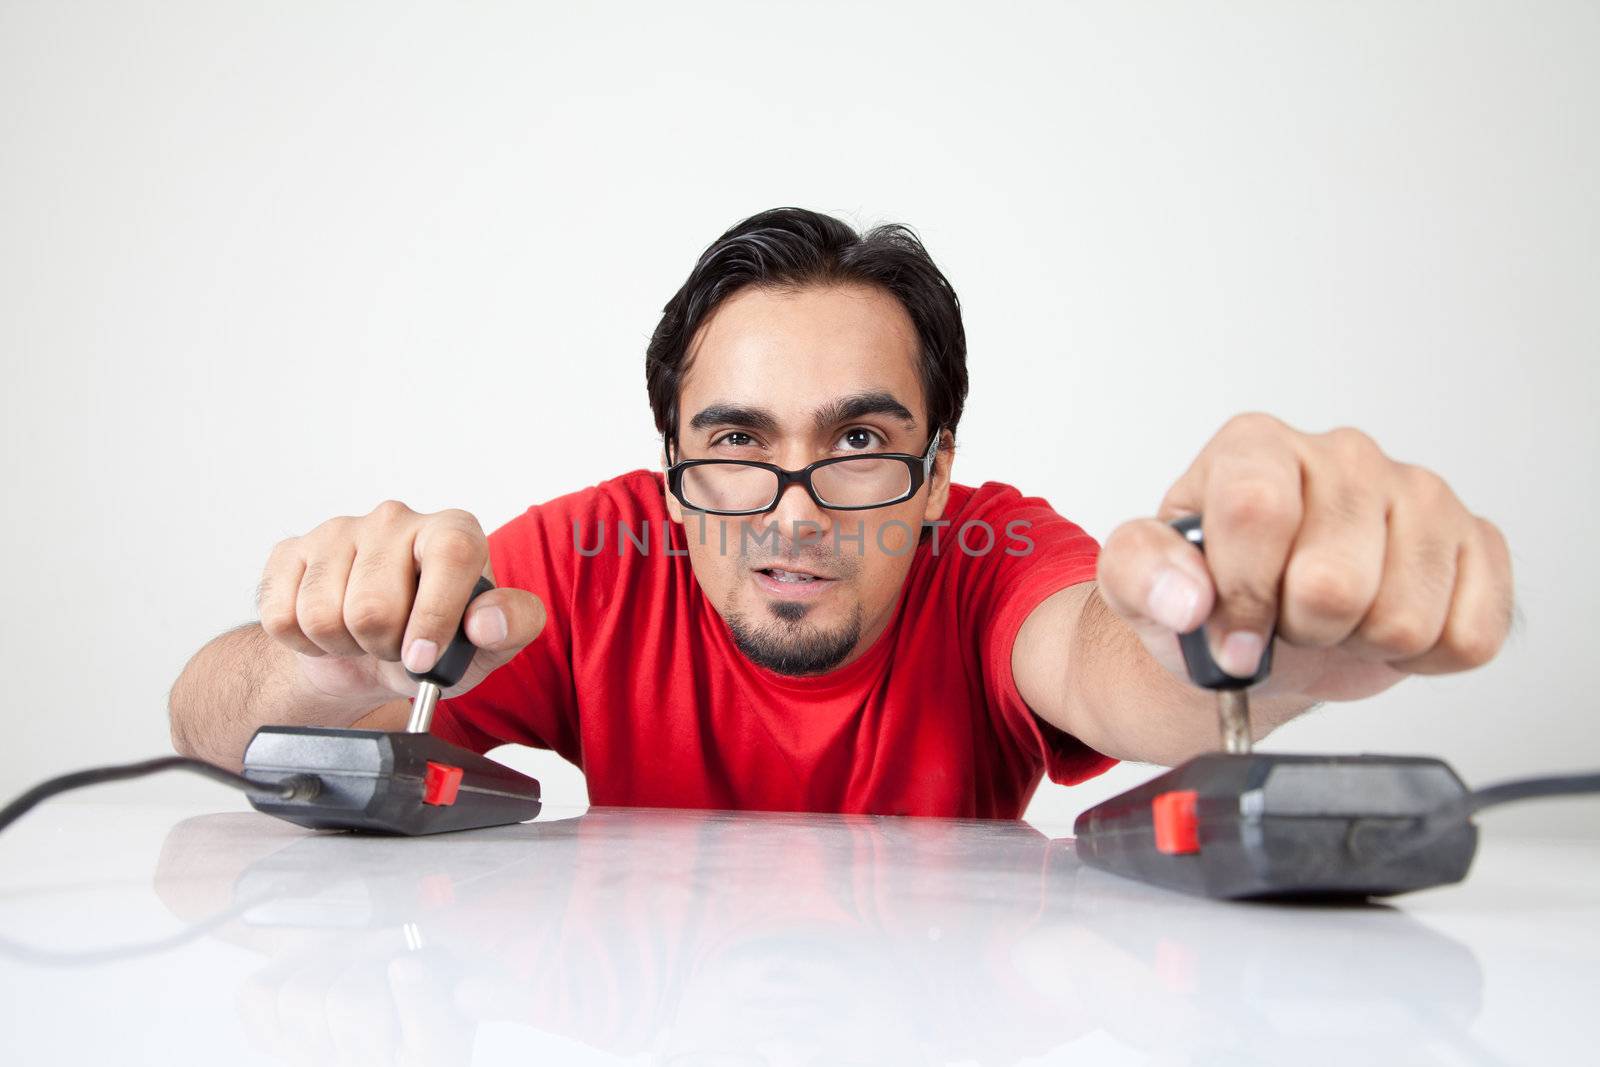 Game nerd playing with two joysticks by haiderazim